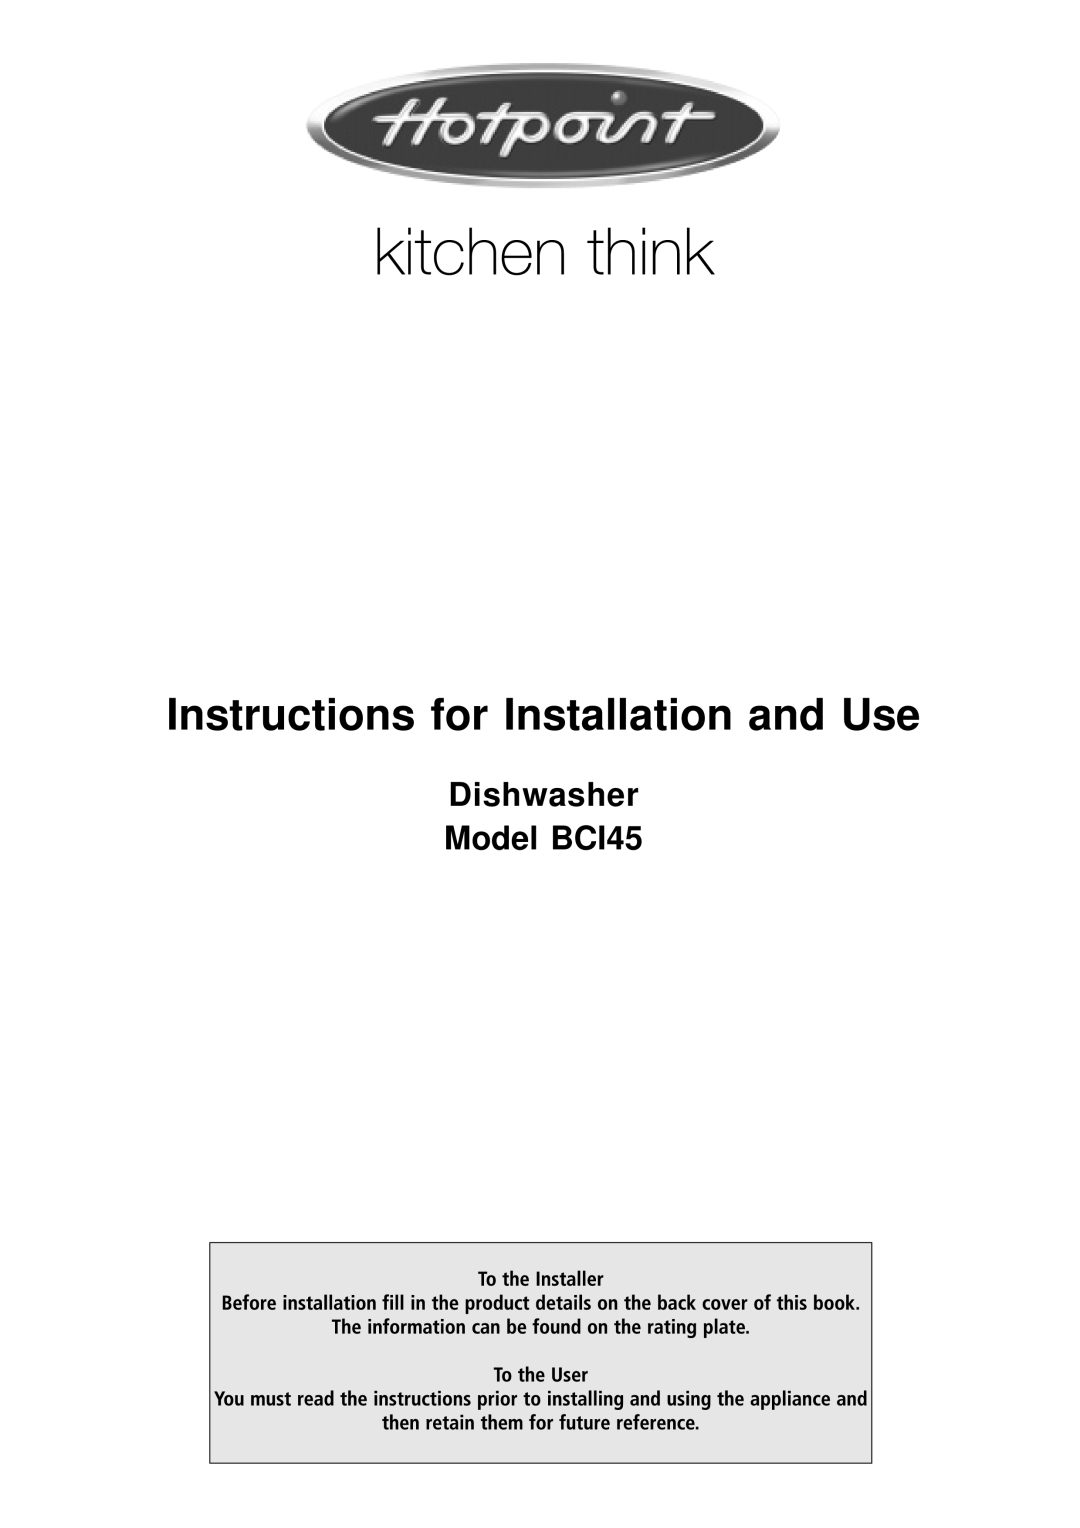 Hotpoint manual Instructions for Installation and Use, Dishwasher Model BCI45 